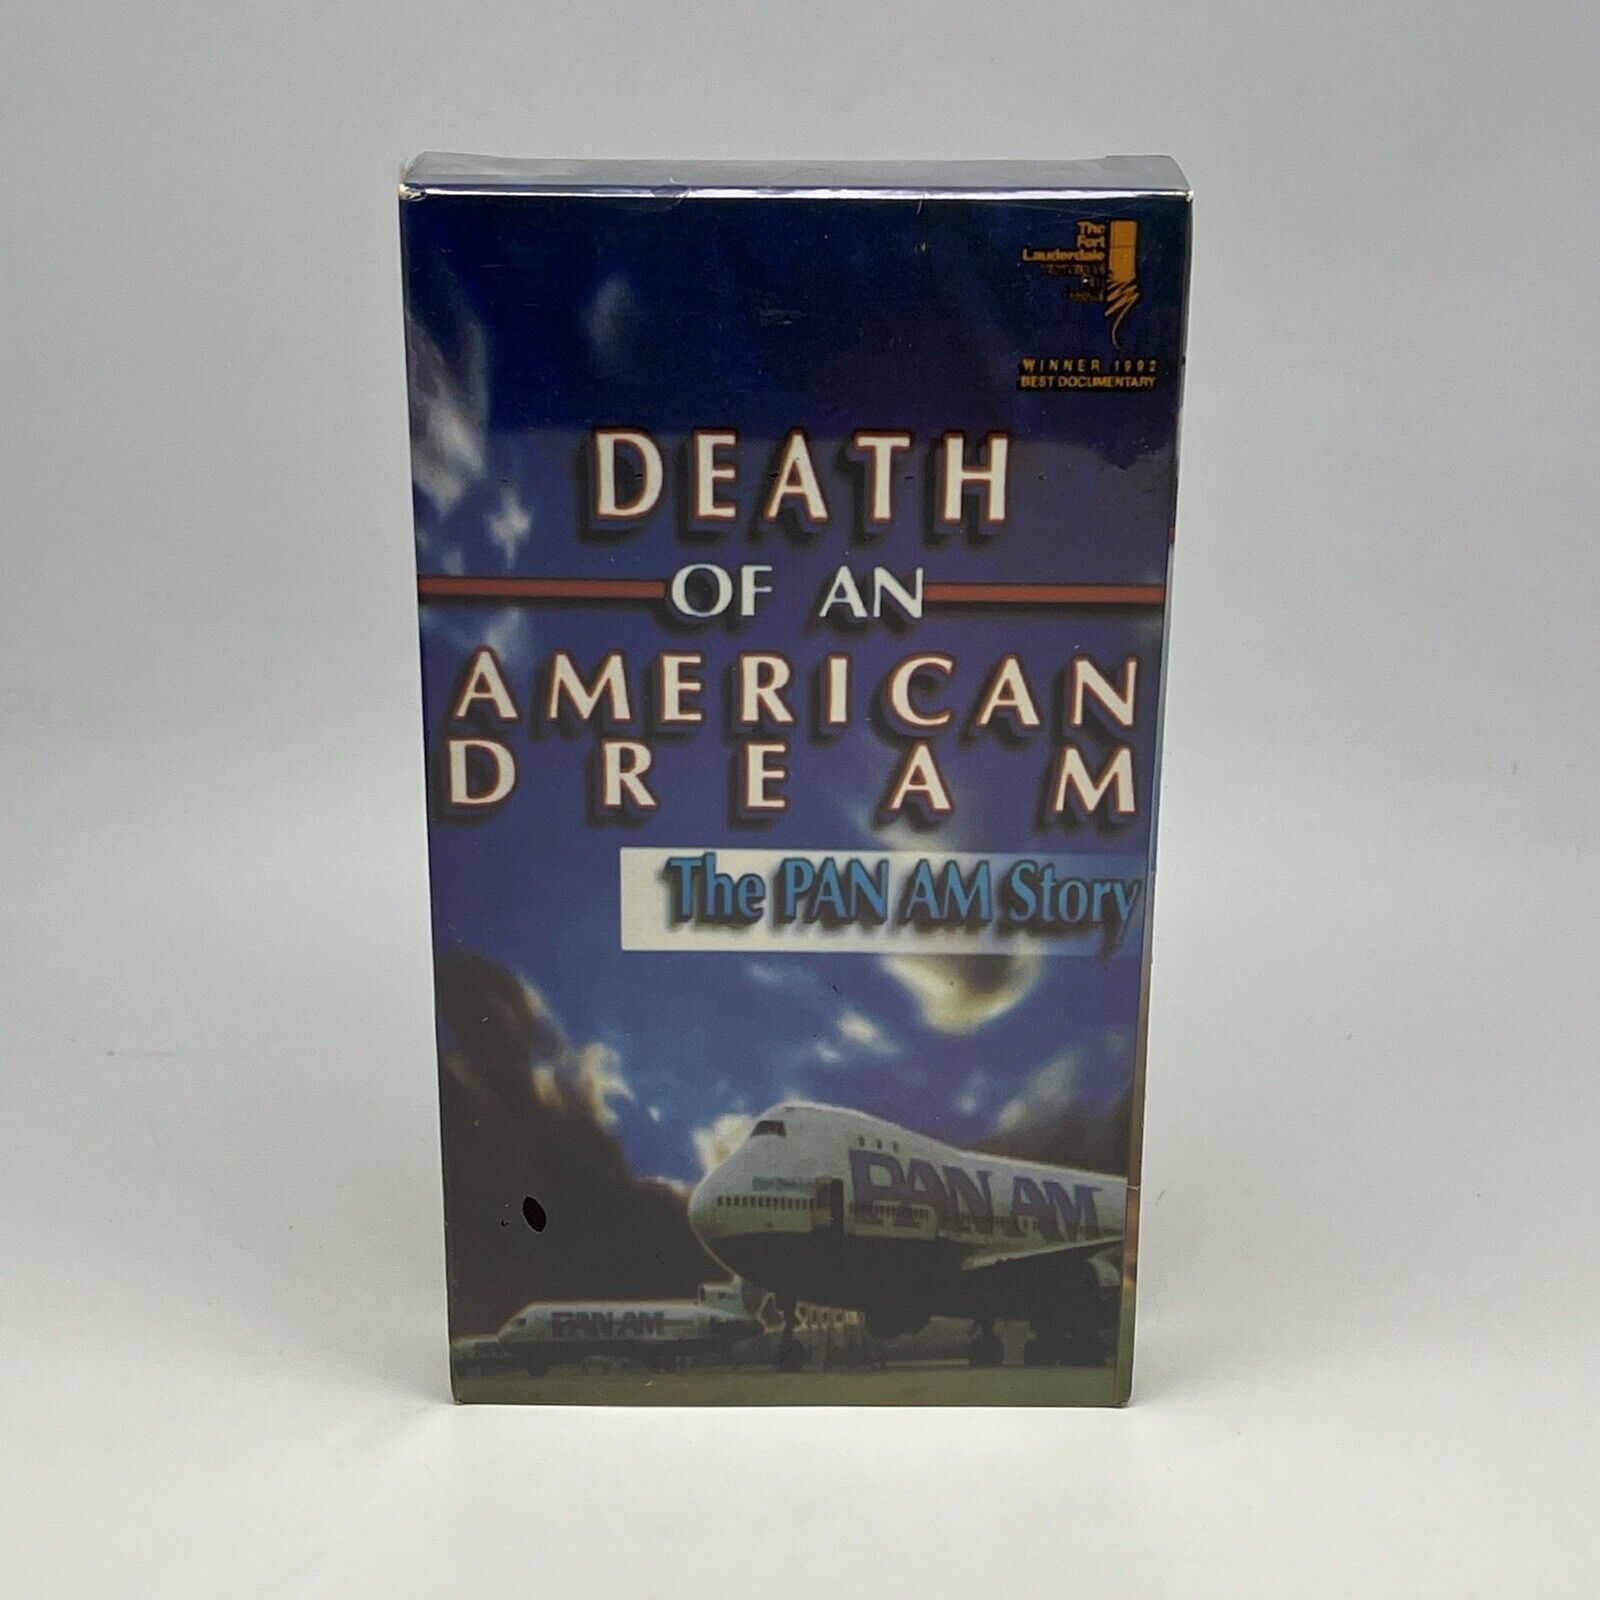 Pan Am Video Death Of An American Dream VHS Tape New